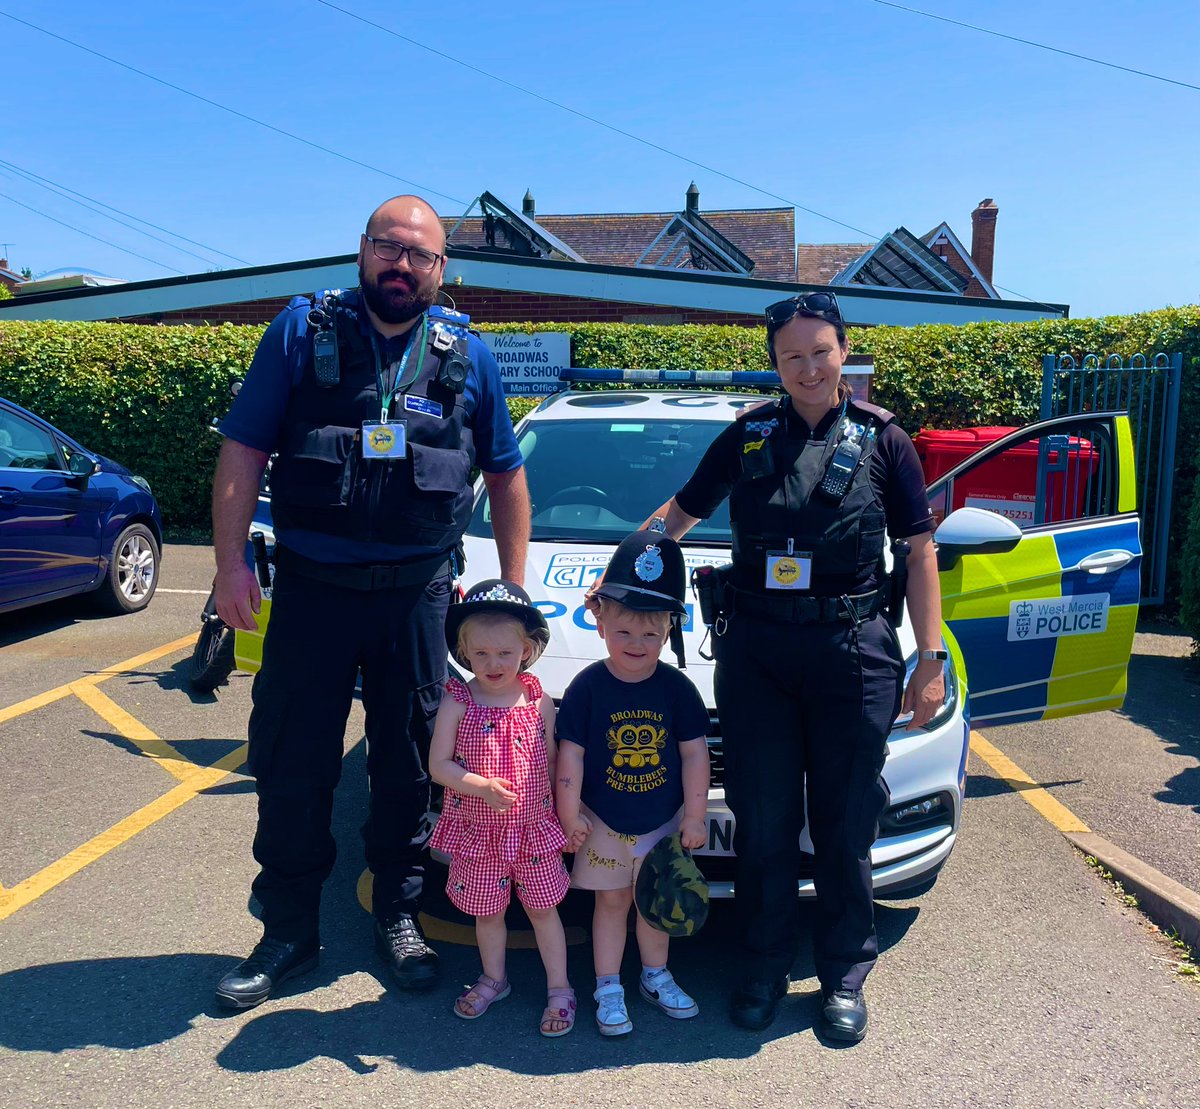 PC Stanley & PCSO Knight attended Broadwas Bumblebee’s Pre-school to talk about what we do & explain how we help people. We also showed them the Police Car 🚔which they loved seeing the lights & pressing the sirens 🚨#PolicingPromise #saferpeople 👮🏻👮🏻‍♂️